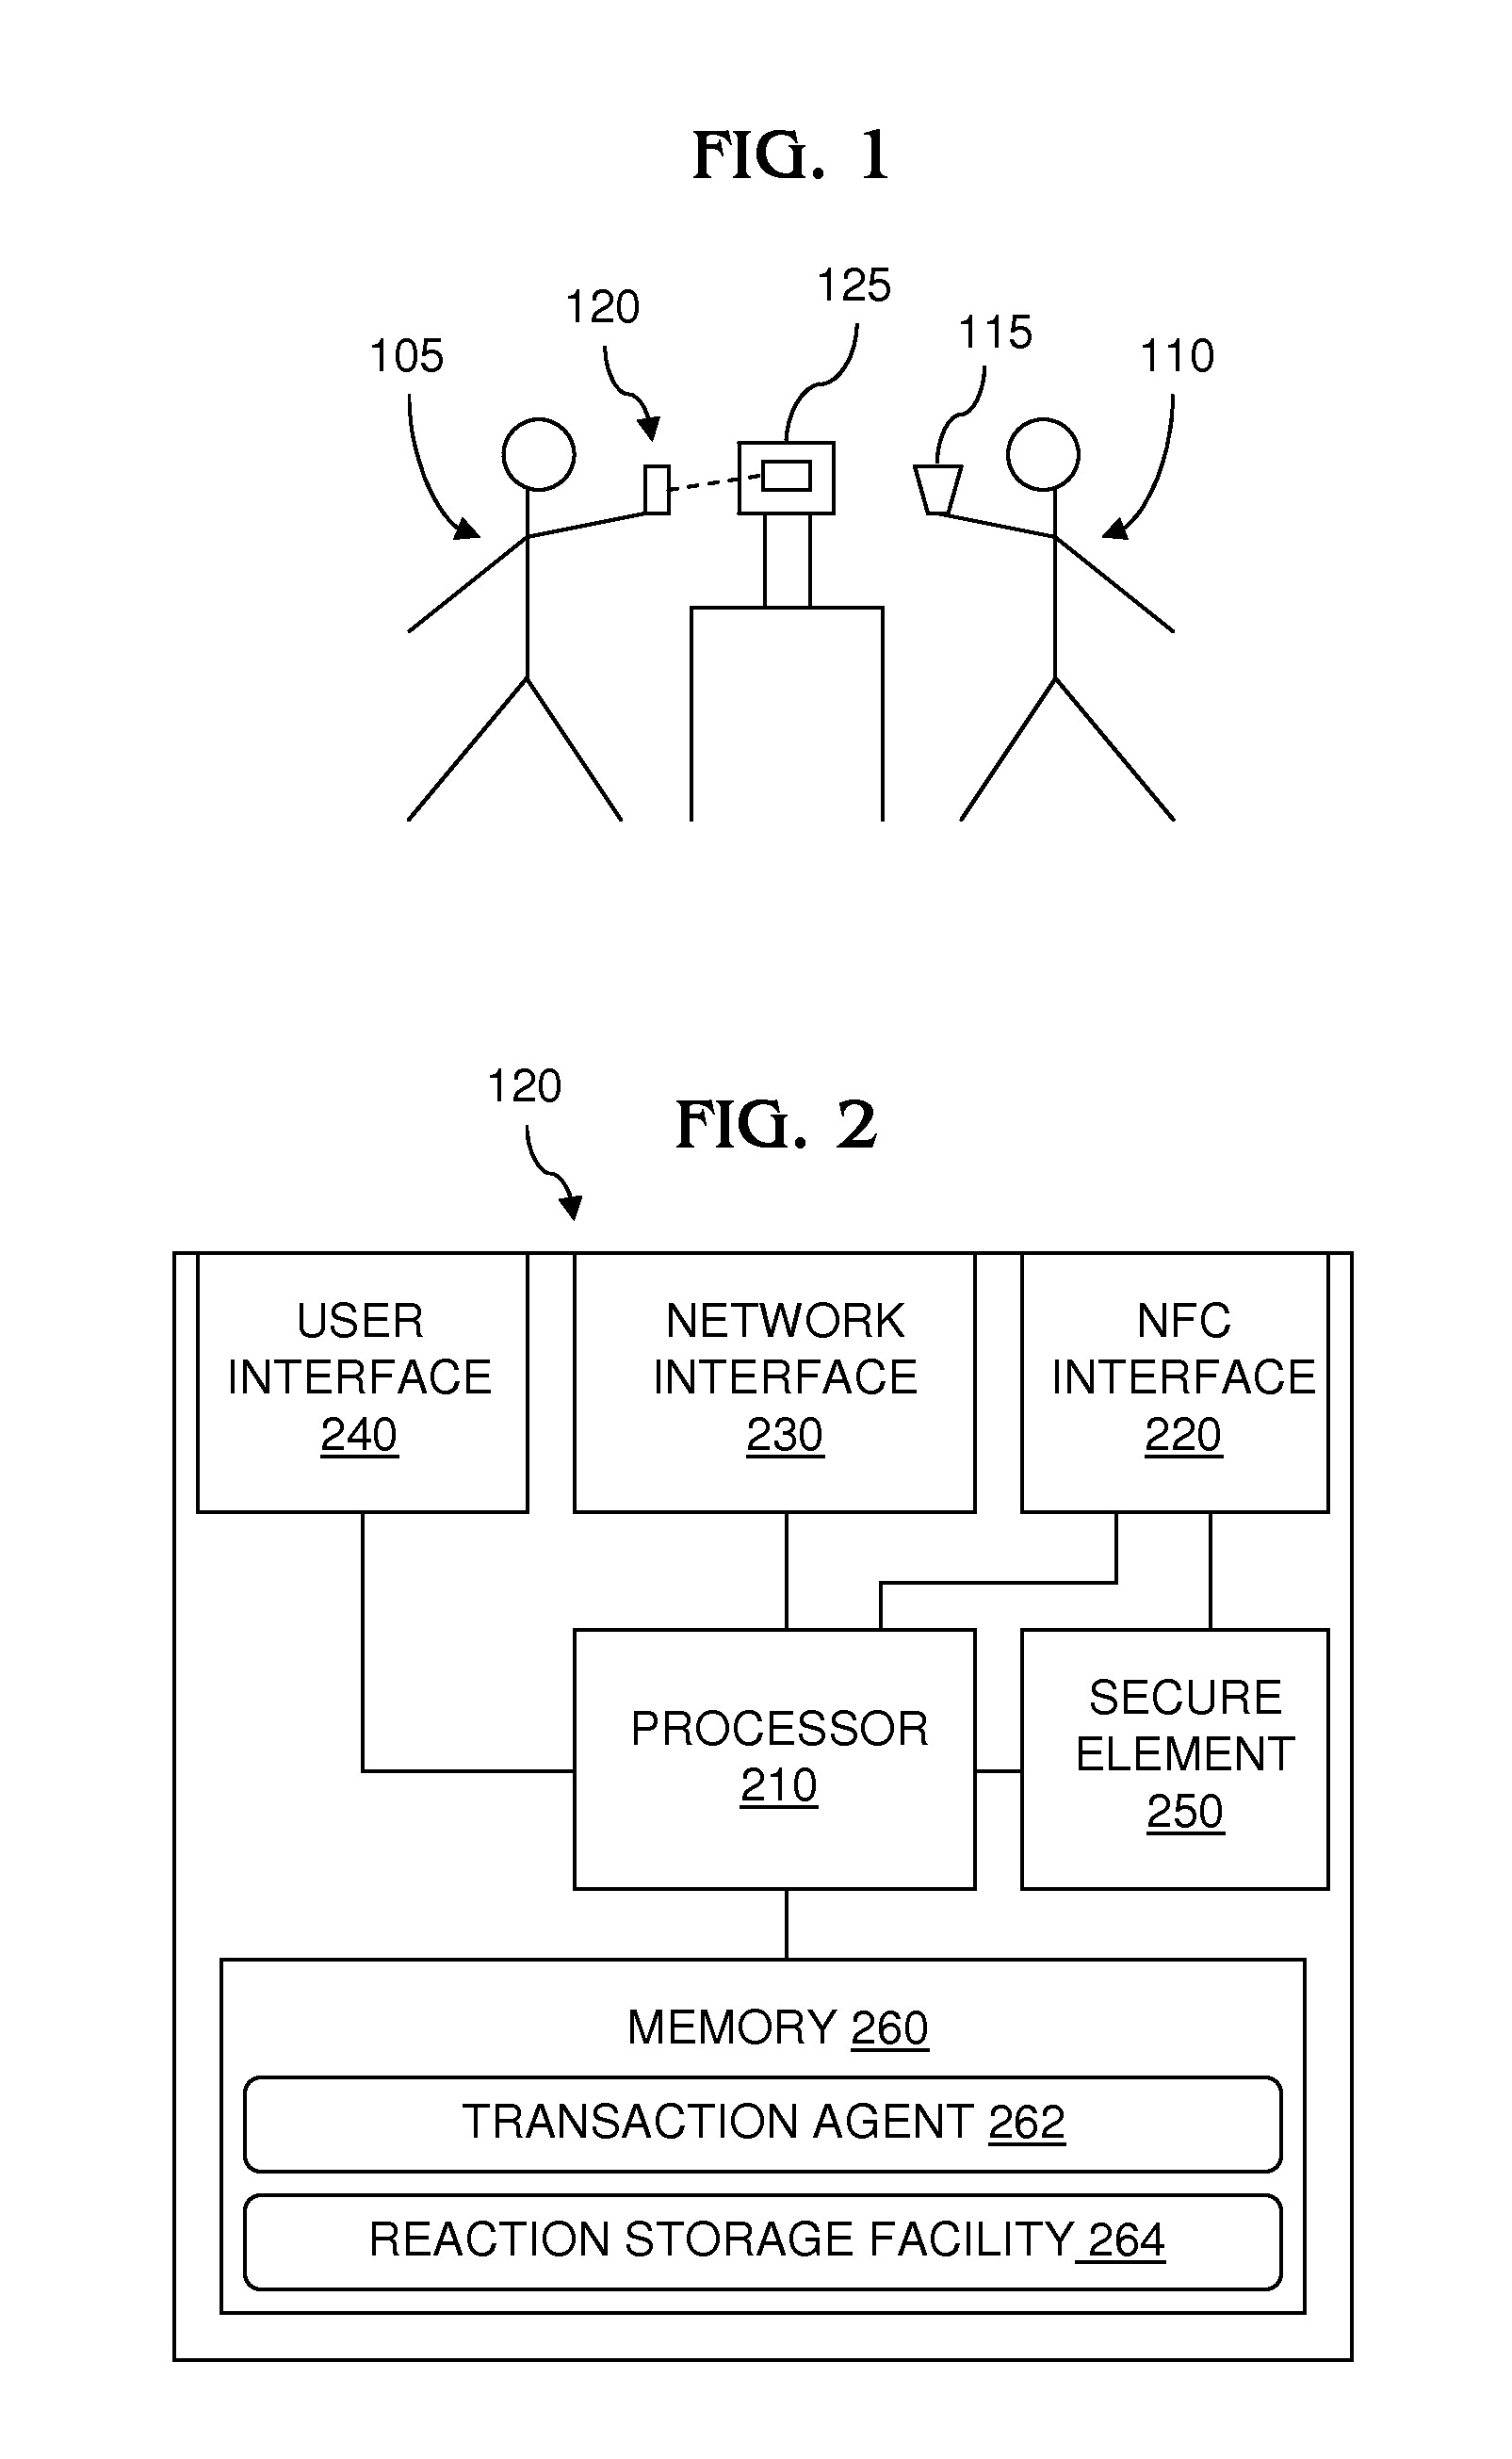 Method and System for Facilitating Customer Reactions to Proximity Mobile Payment Transactions